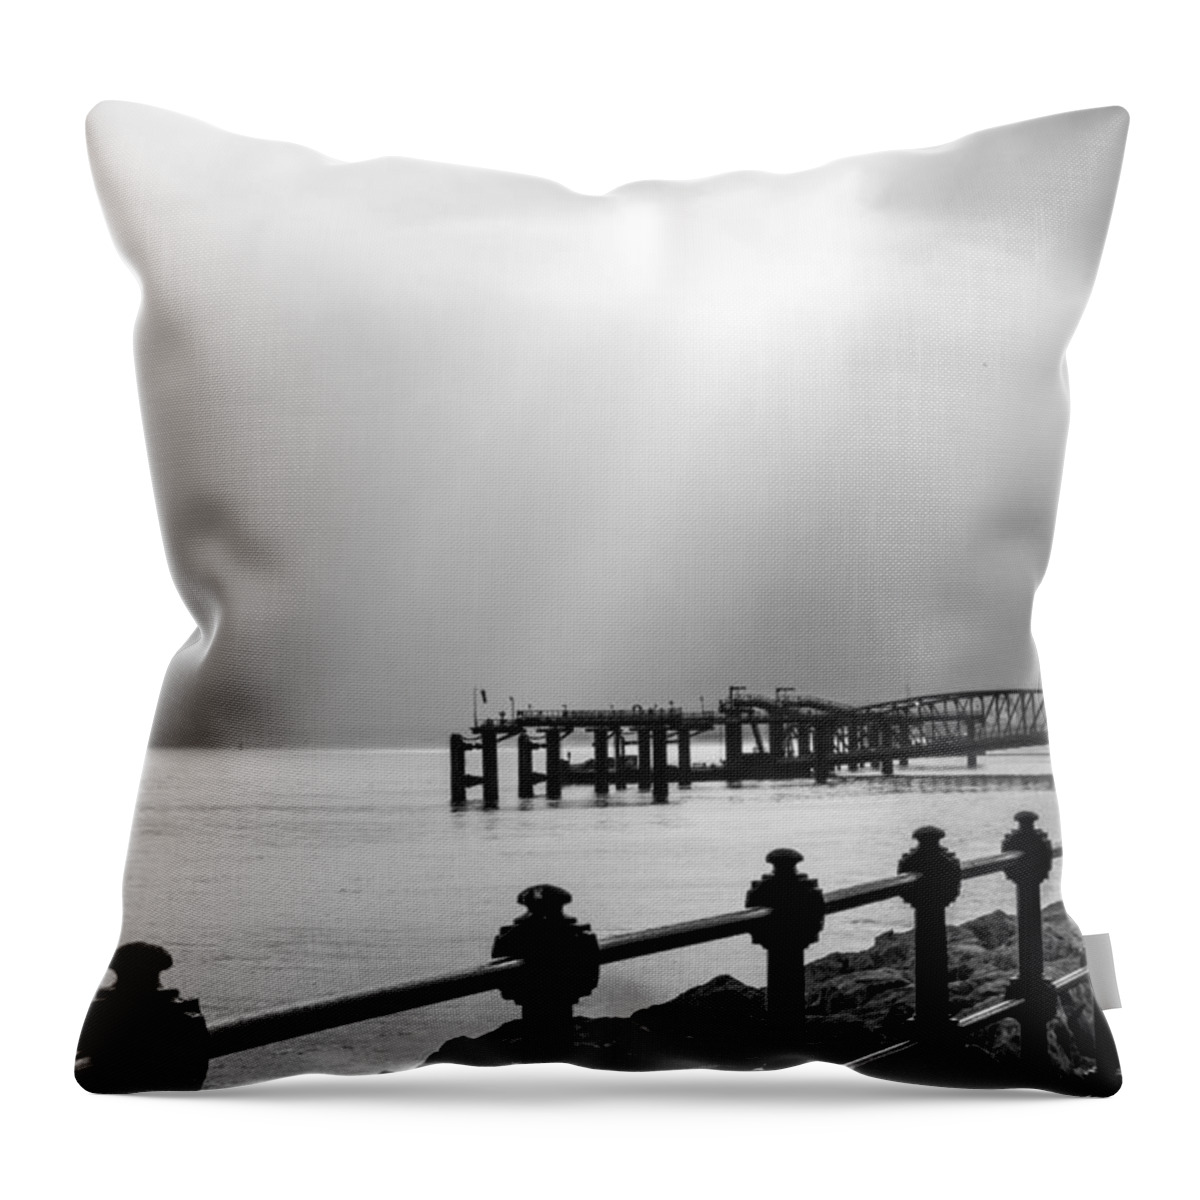 Boat Throw Pillow featuring the photograph Mersey Halo by Spikey Mouse Photography